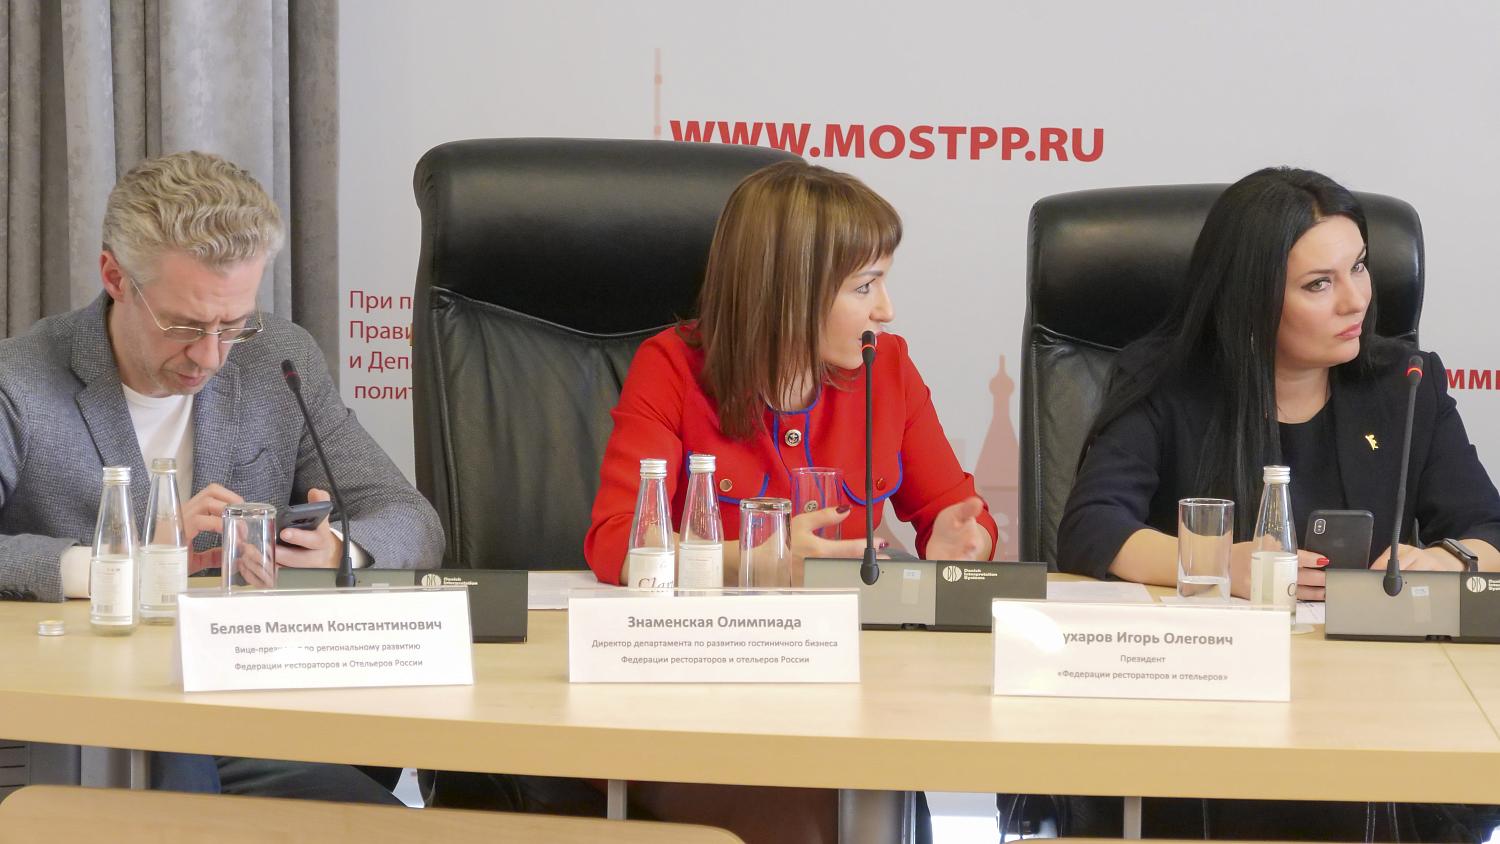 Restaurateurs and hoteliers discussed the situation in the industry in connection with the coronavirus pandemic